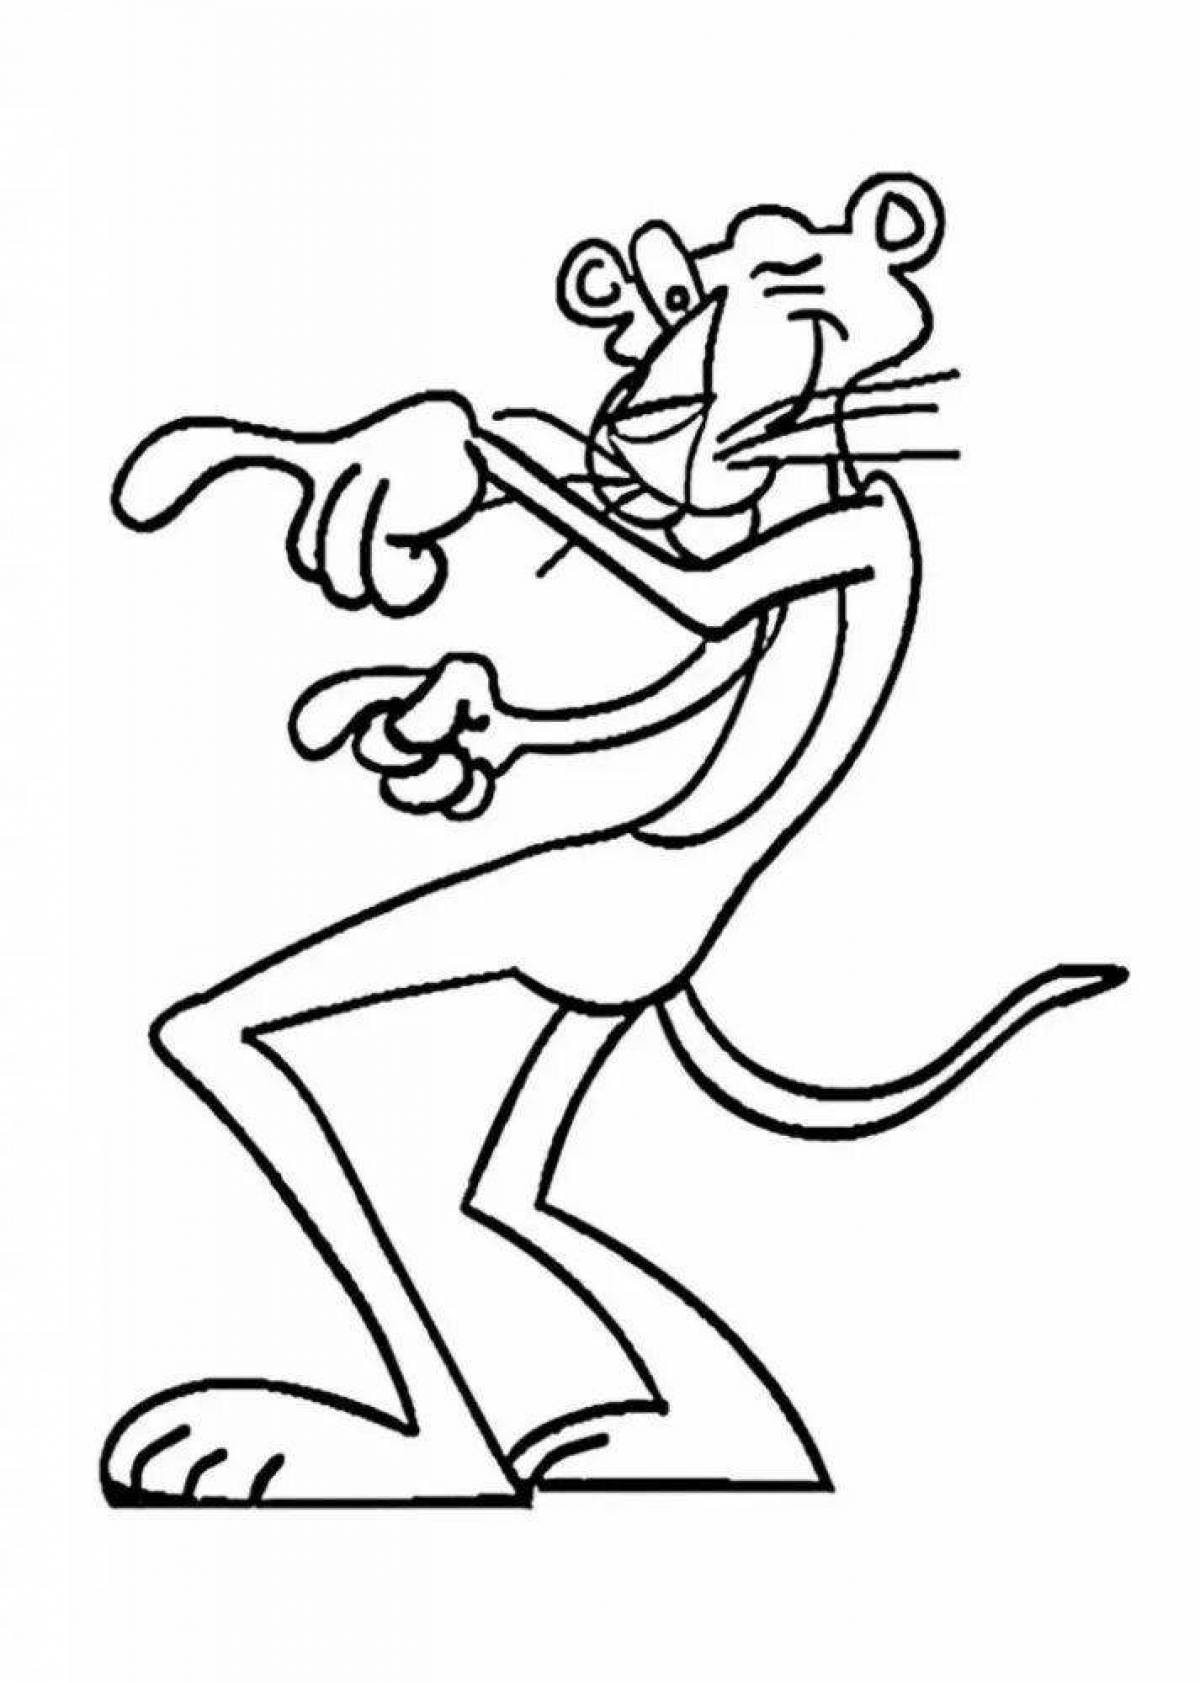 Charming pink panther coloring book